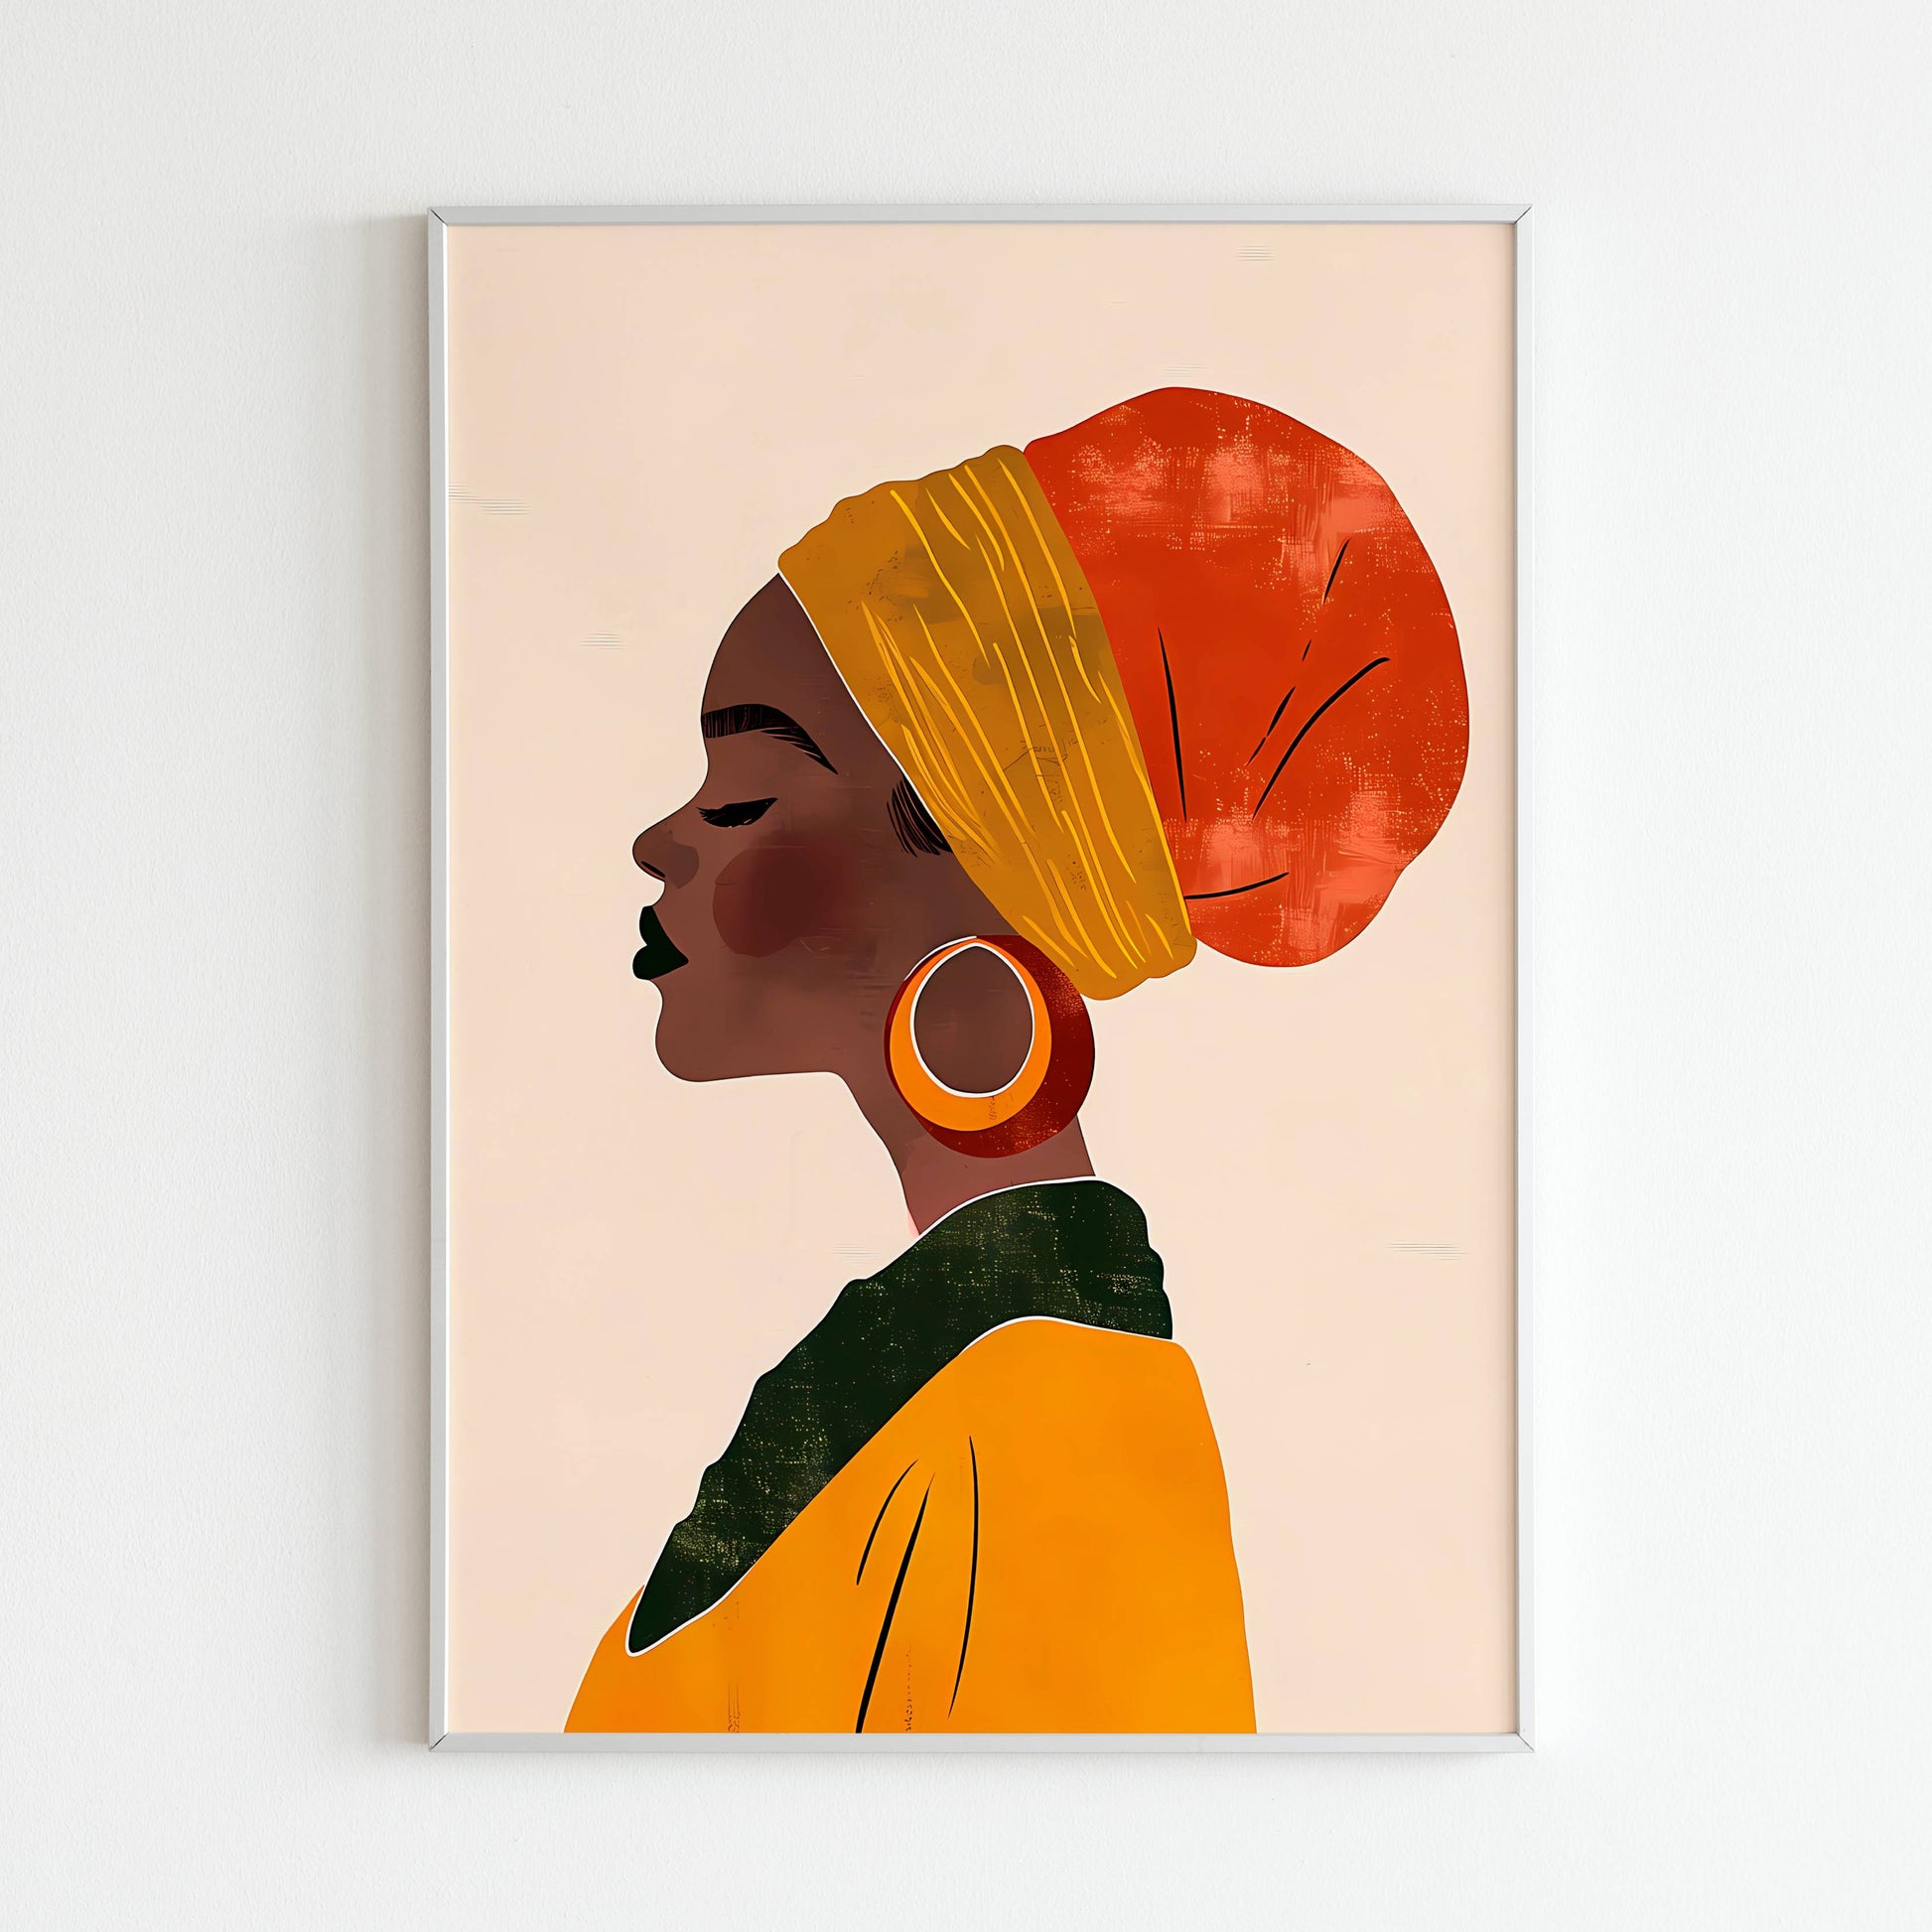 African Woman Abstract Art close-up of printable wall art poster. Focus on the colors, shapes, and textures used to represent the African woman.